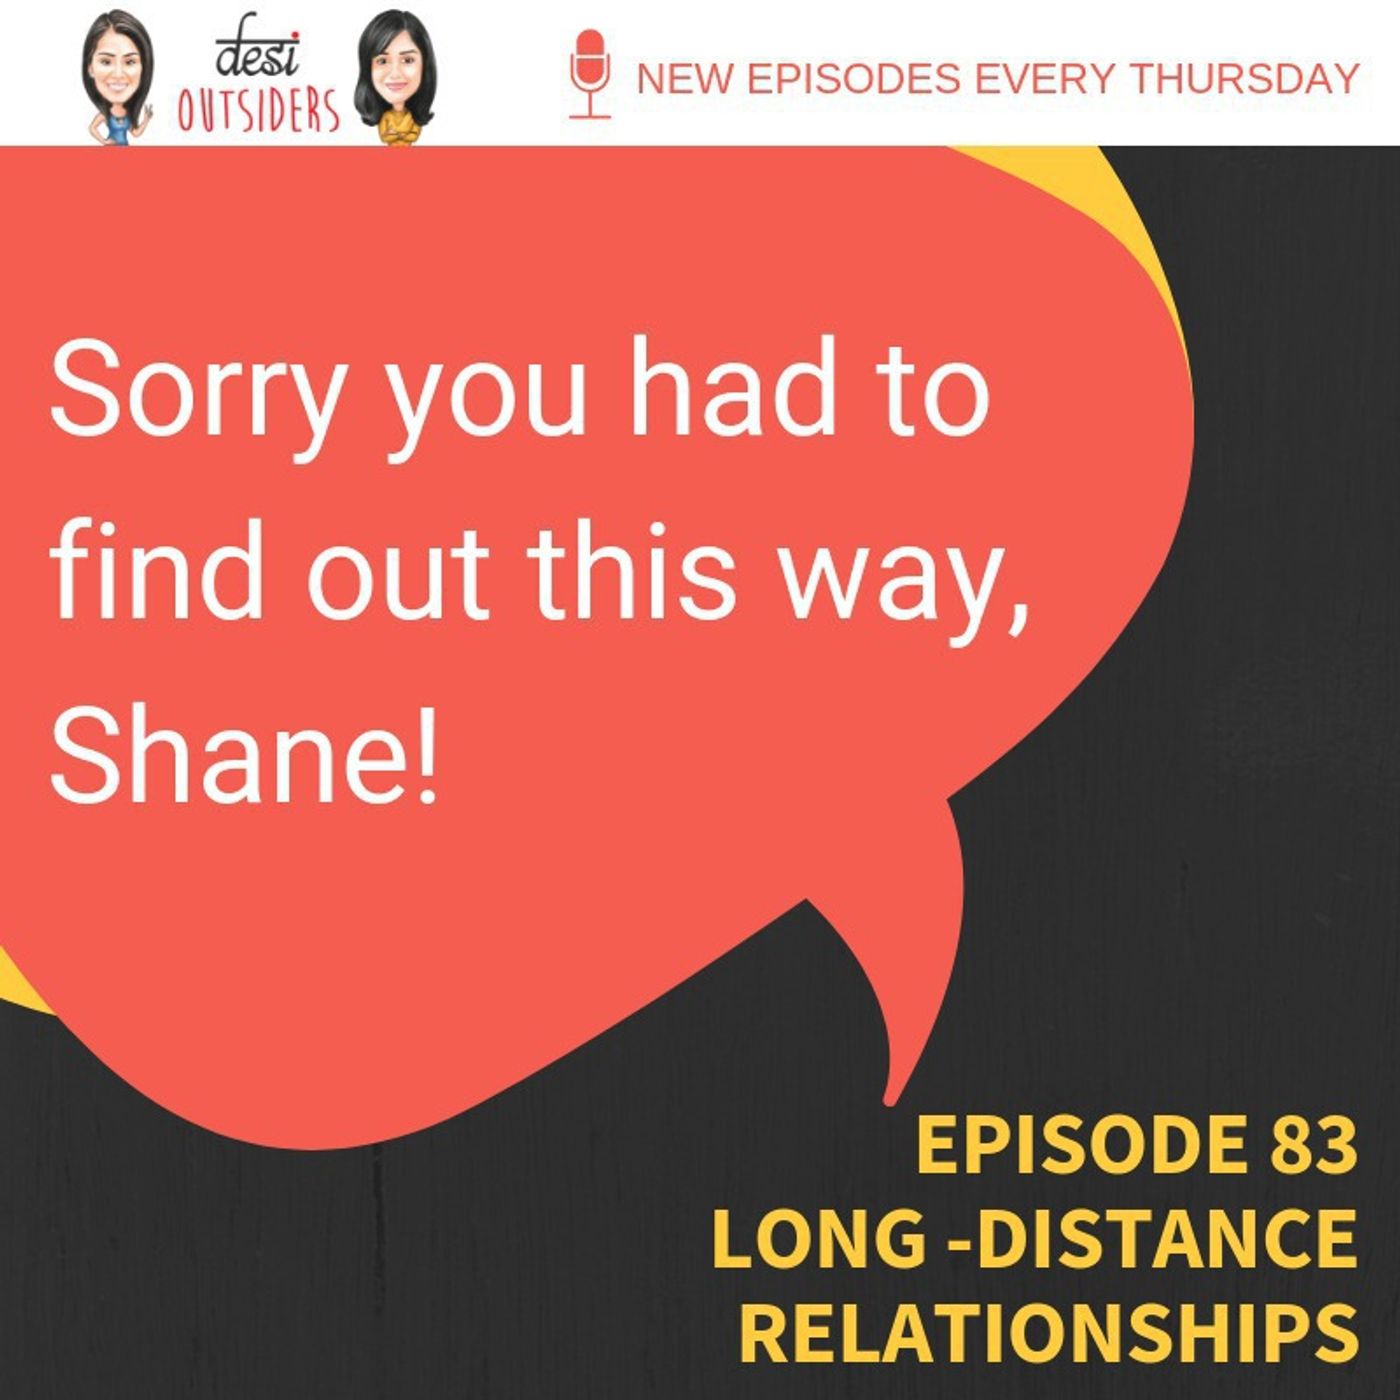 S5 Ep29: Epsiode 83 - Long-Distance Relationships